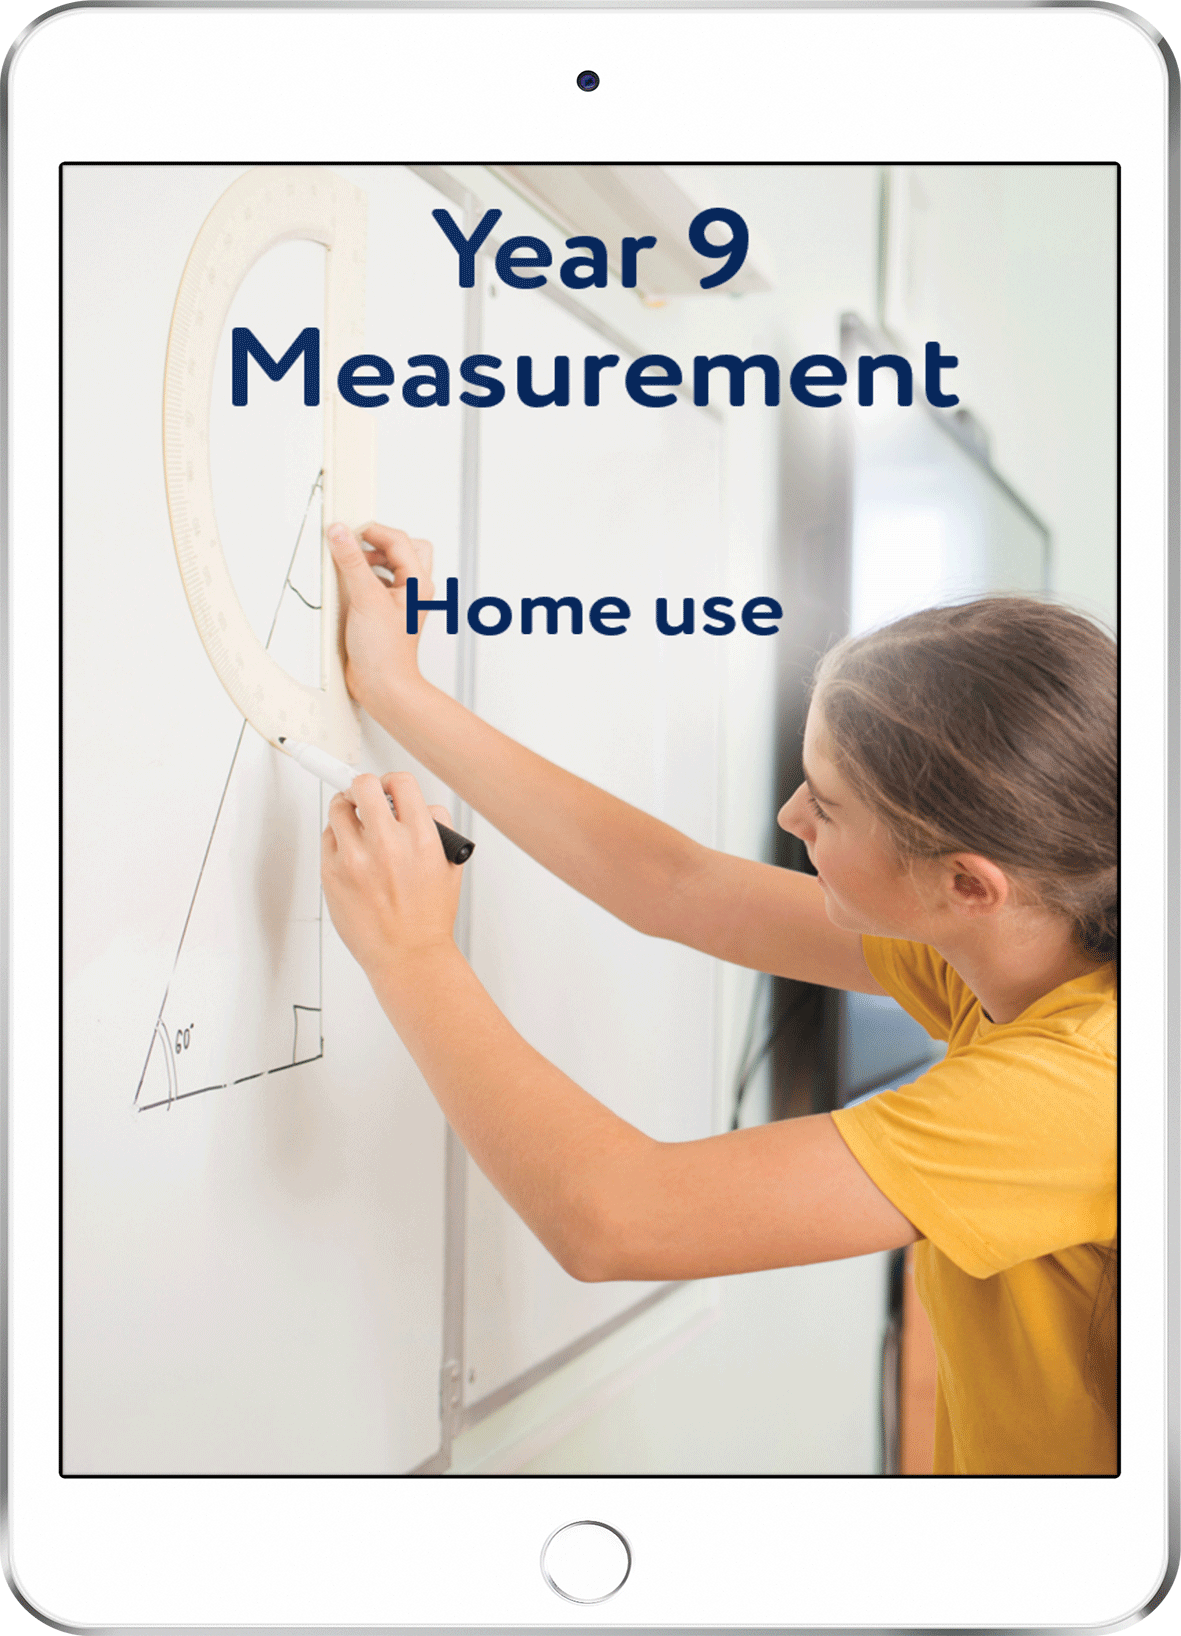 Year 9 Measurement - Home Use